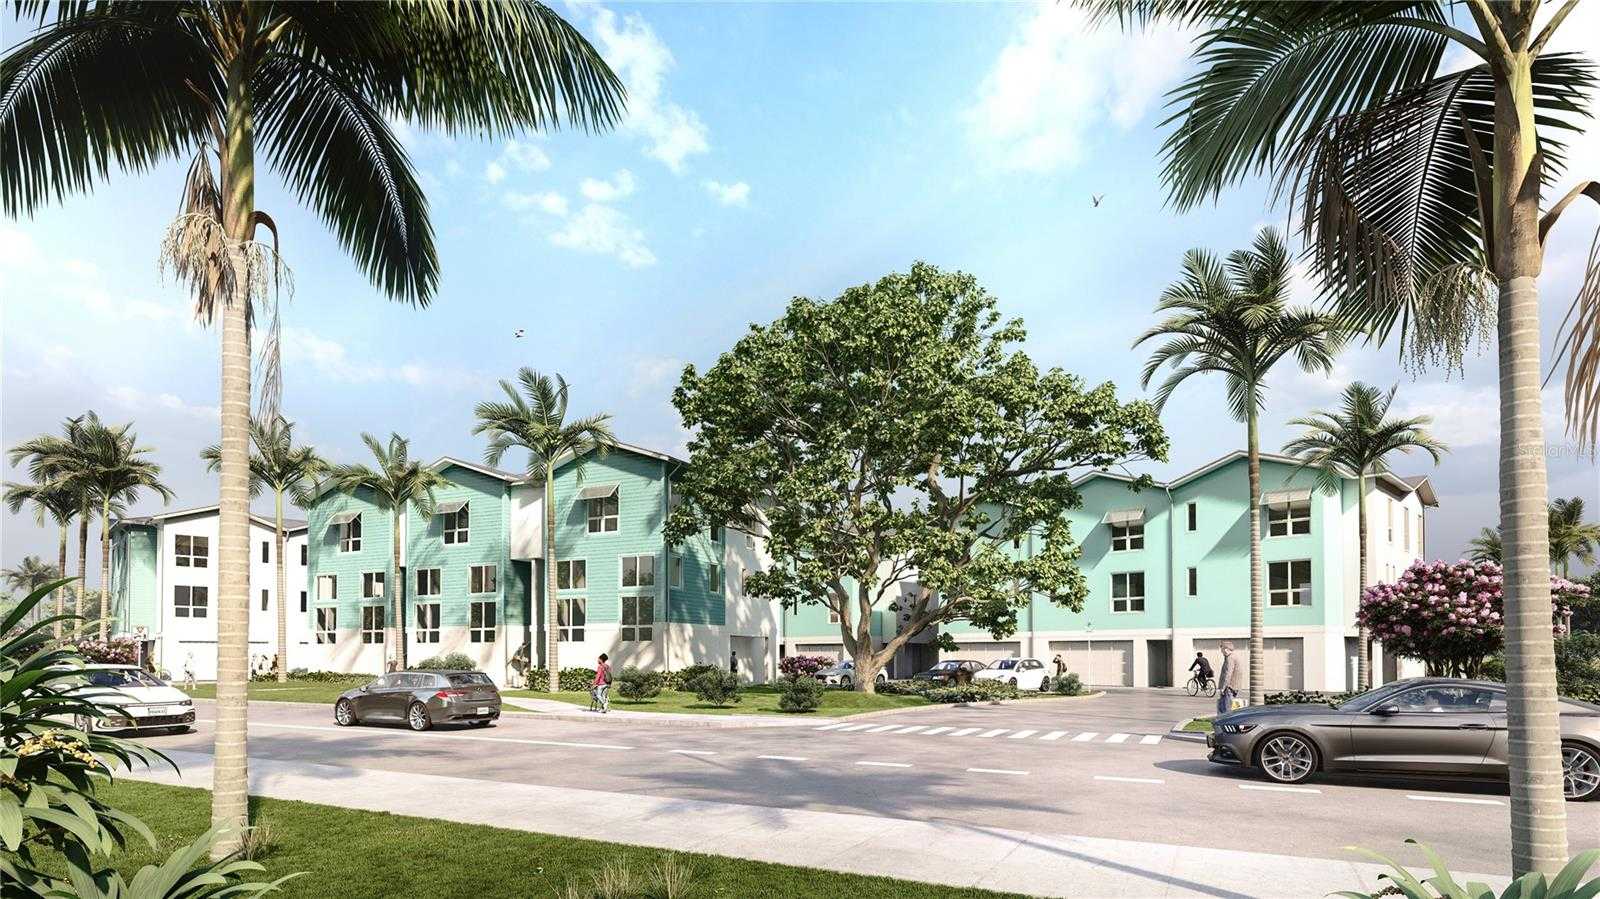 $759,000 - 3Br/4Ba -  for Sale in Coquina Cabanas, St Petersburg